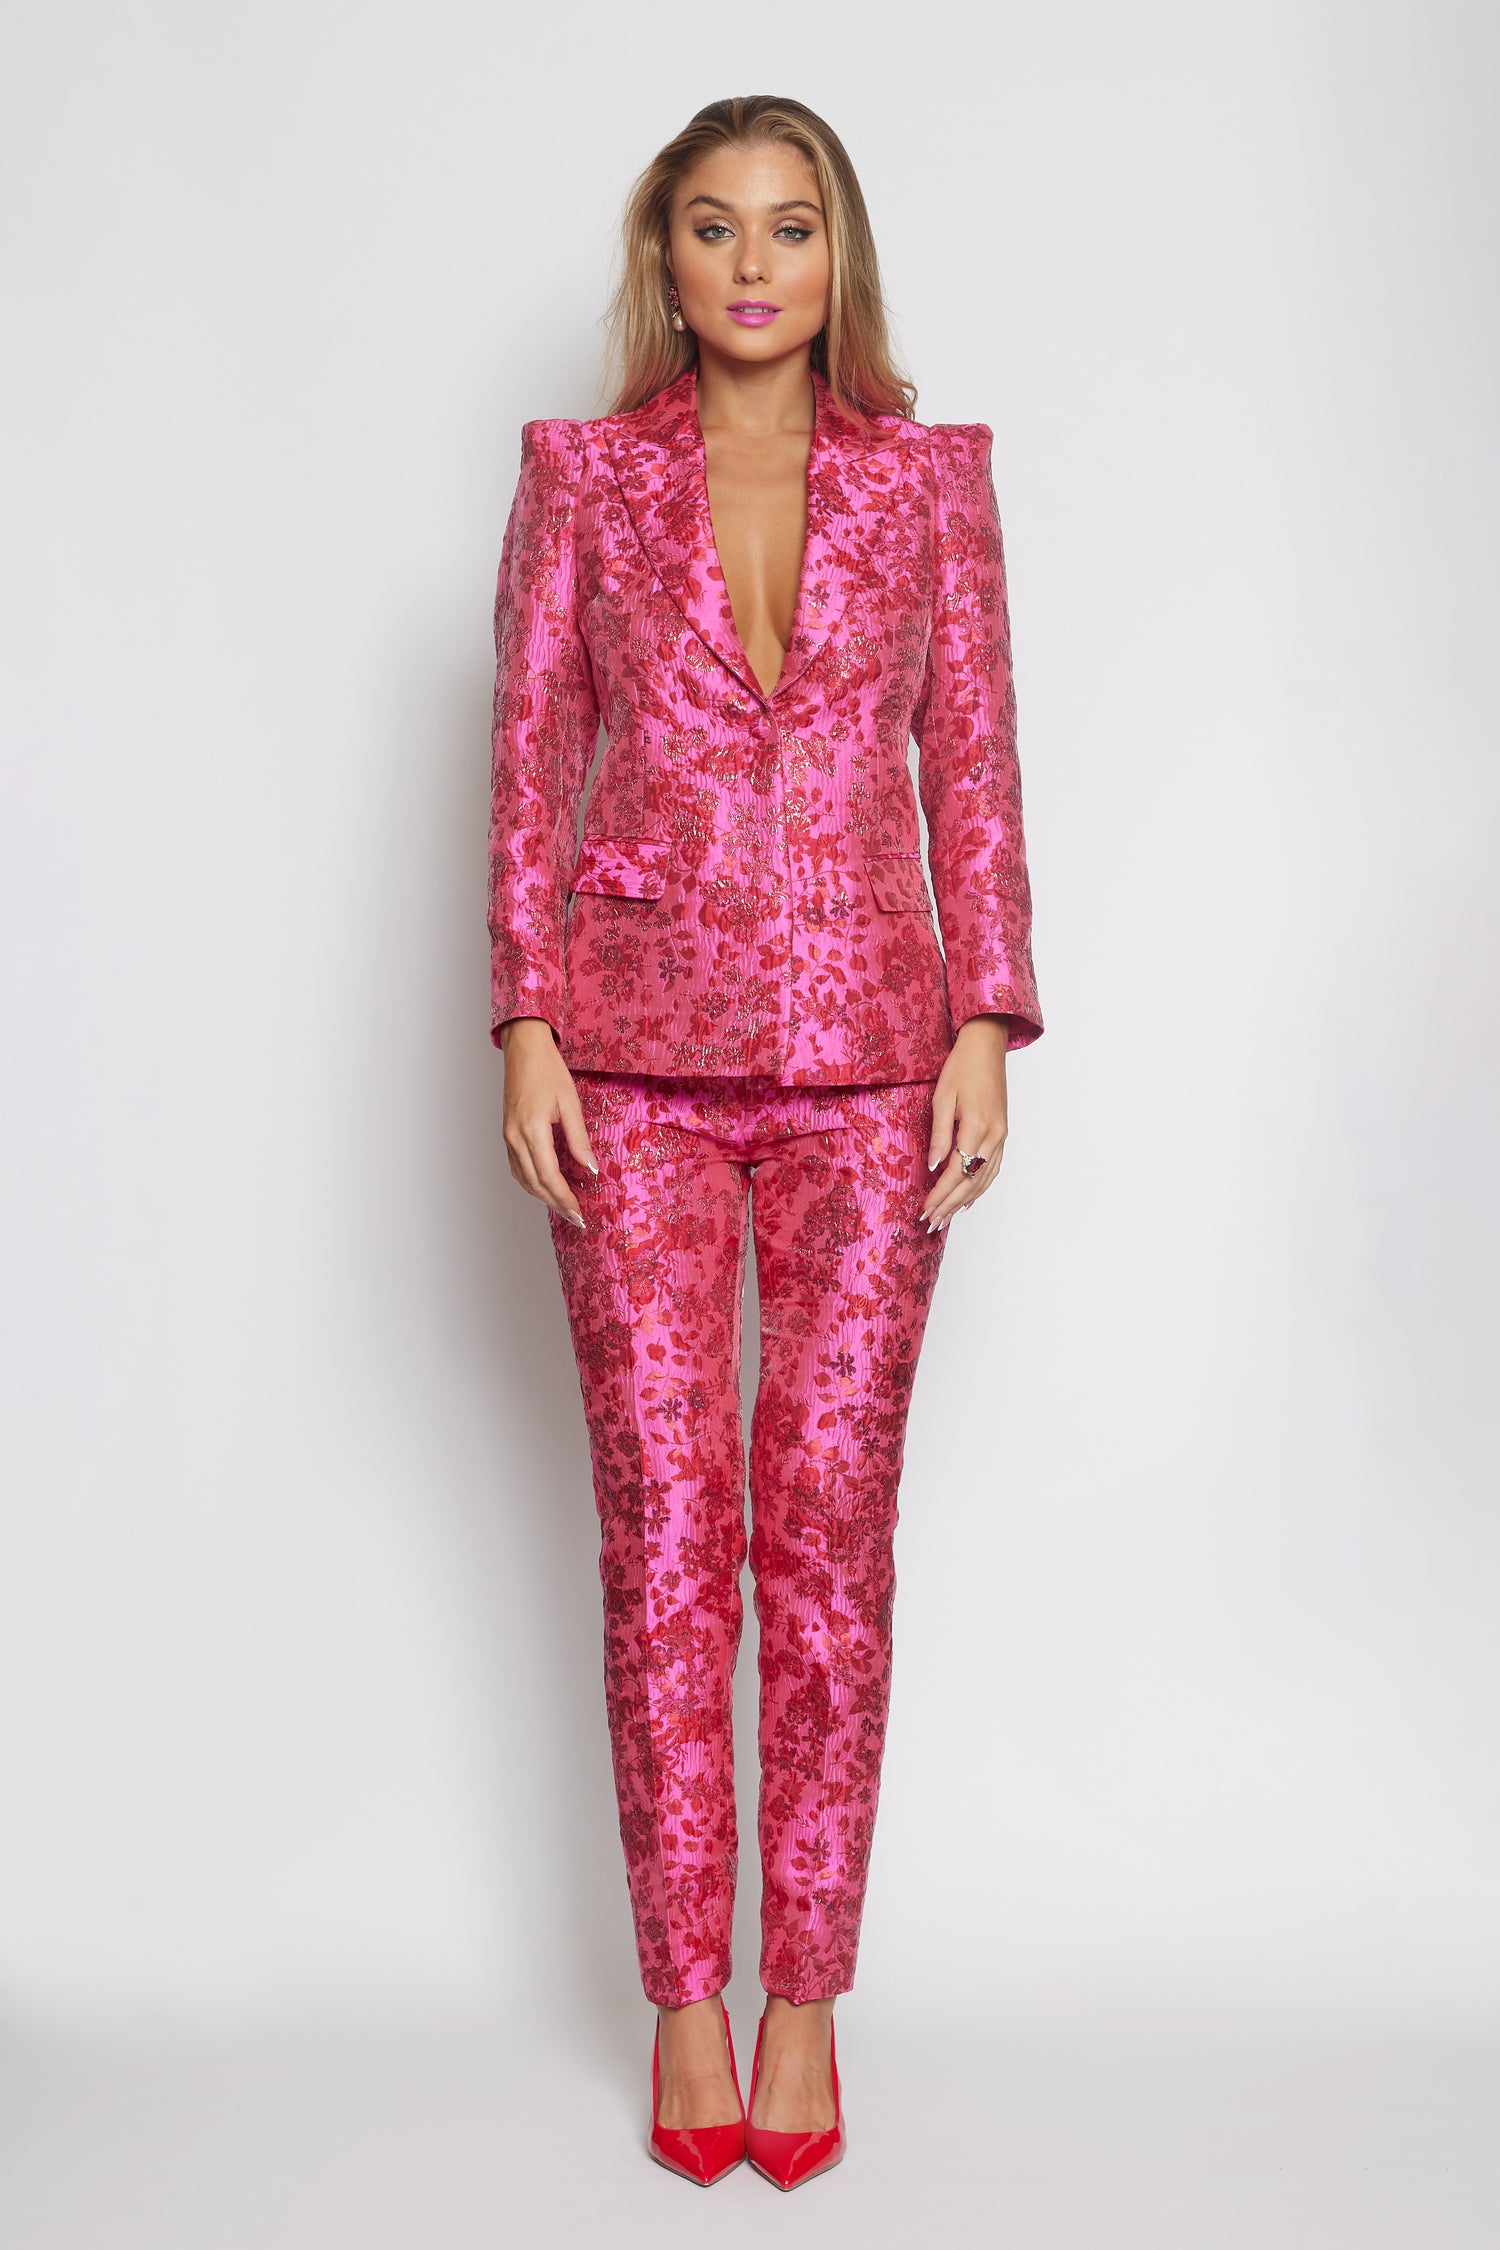 Lipstick Pink and Red Brocade Suit